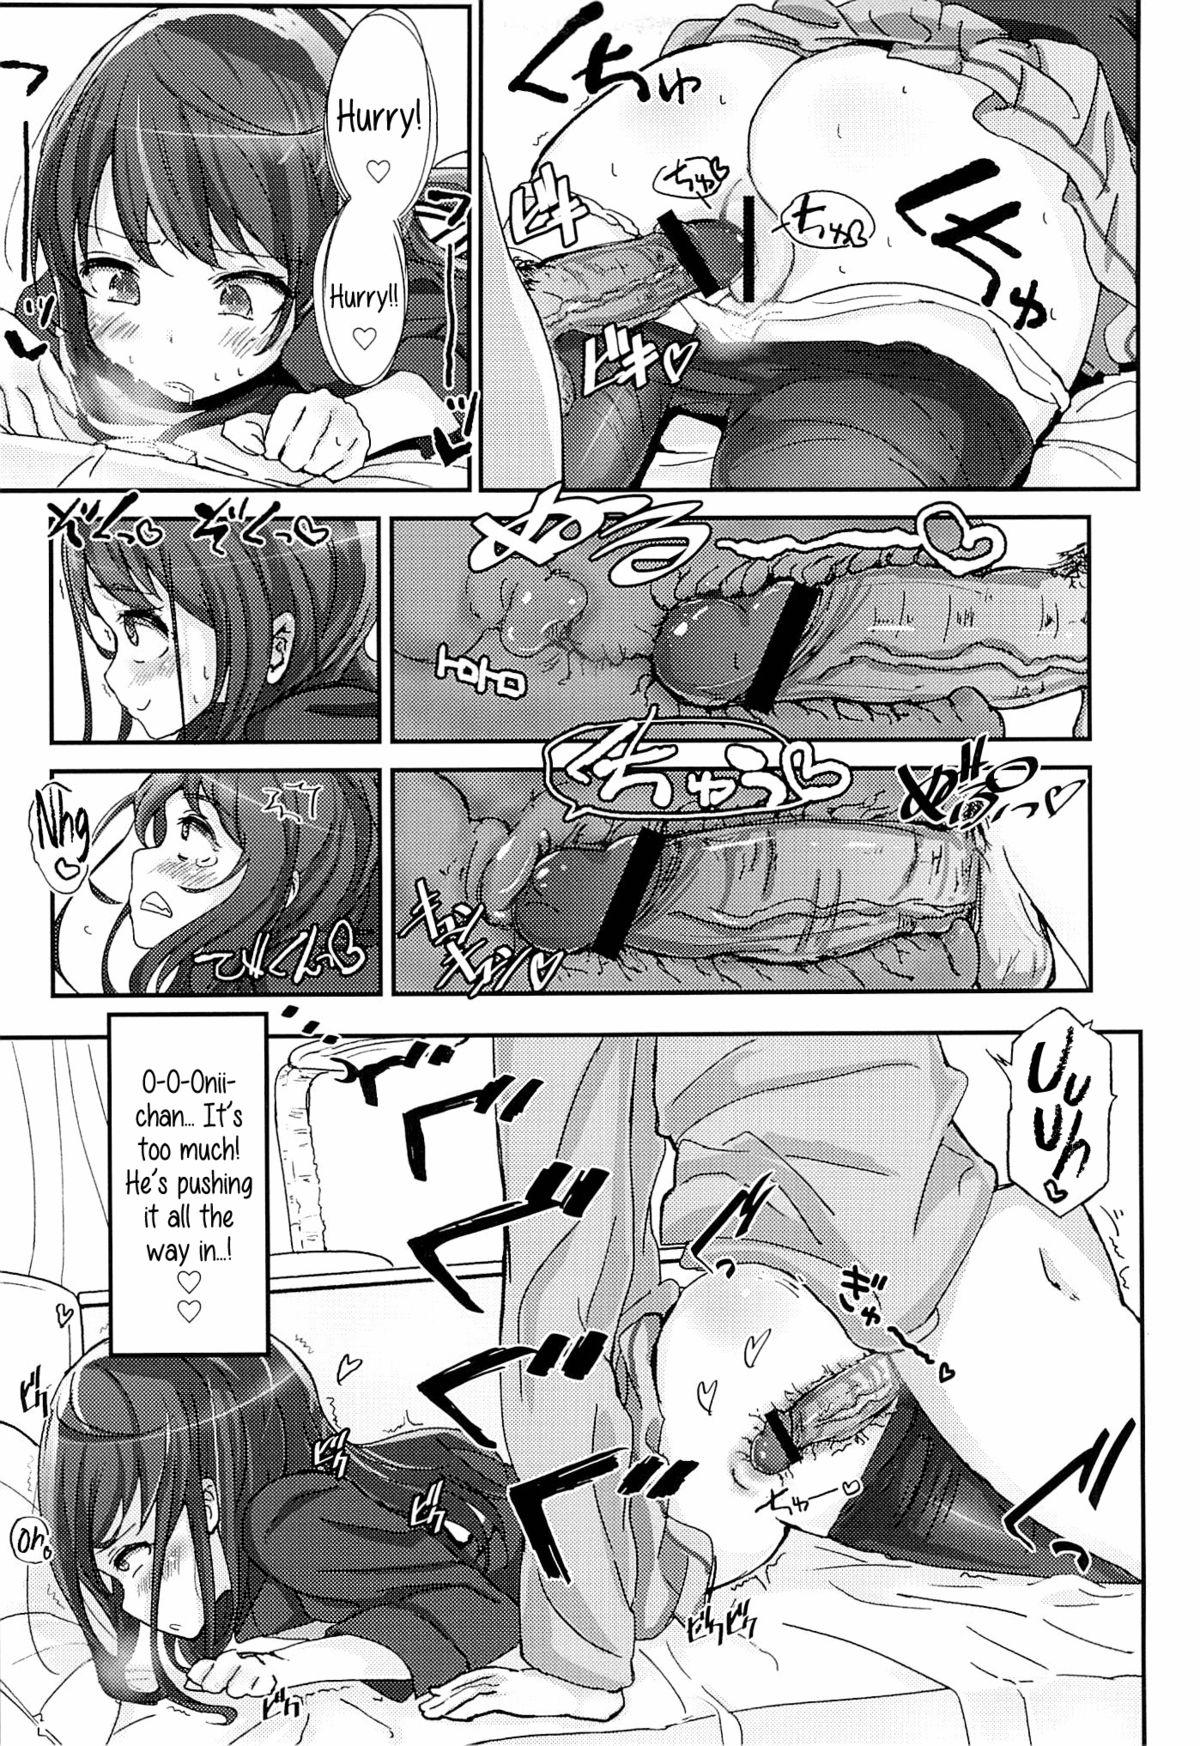 Freckles Shikyuukou no Kanata, Onii chan no Hate | Beyond the mouth of the uterus lies Onii-chan’s demise Rope - Page 6